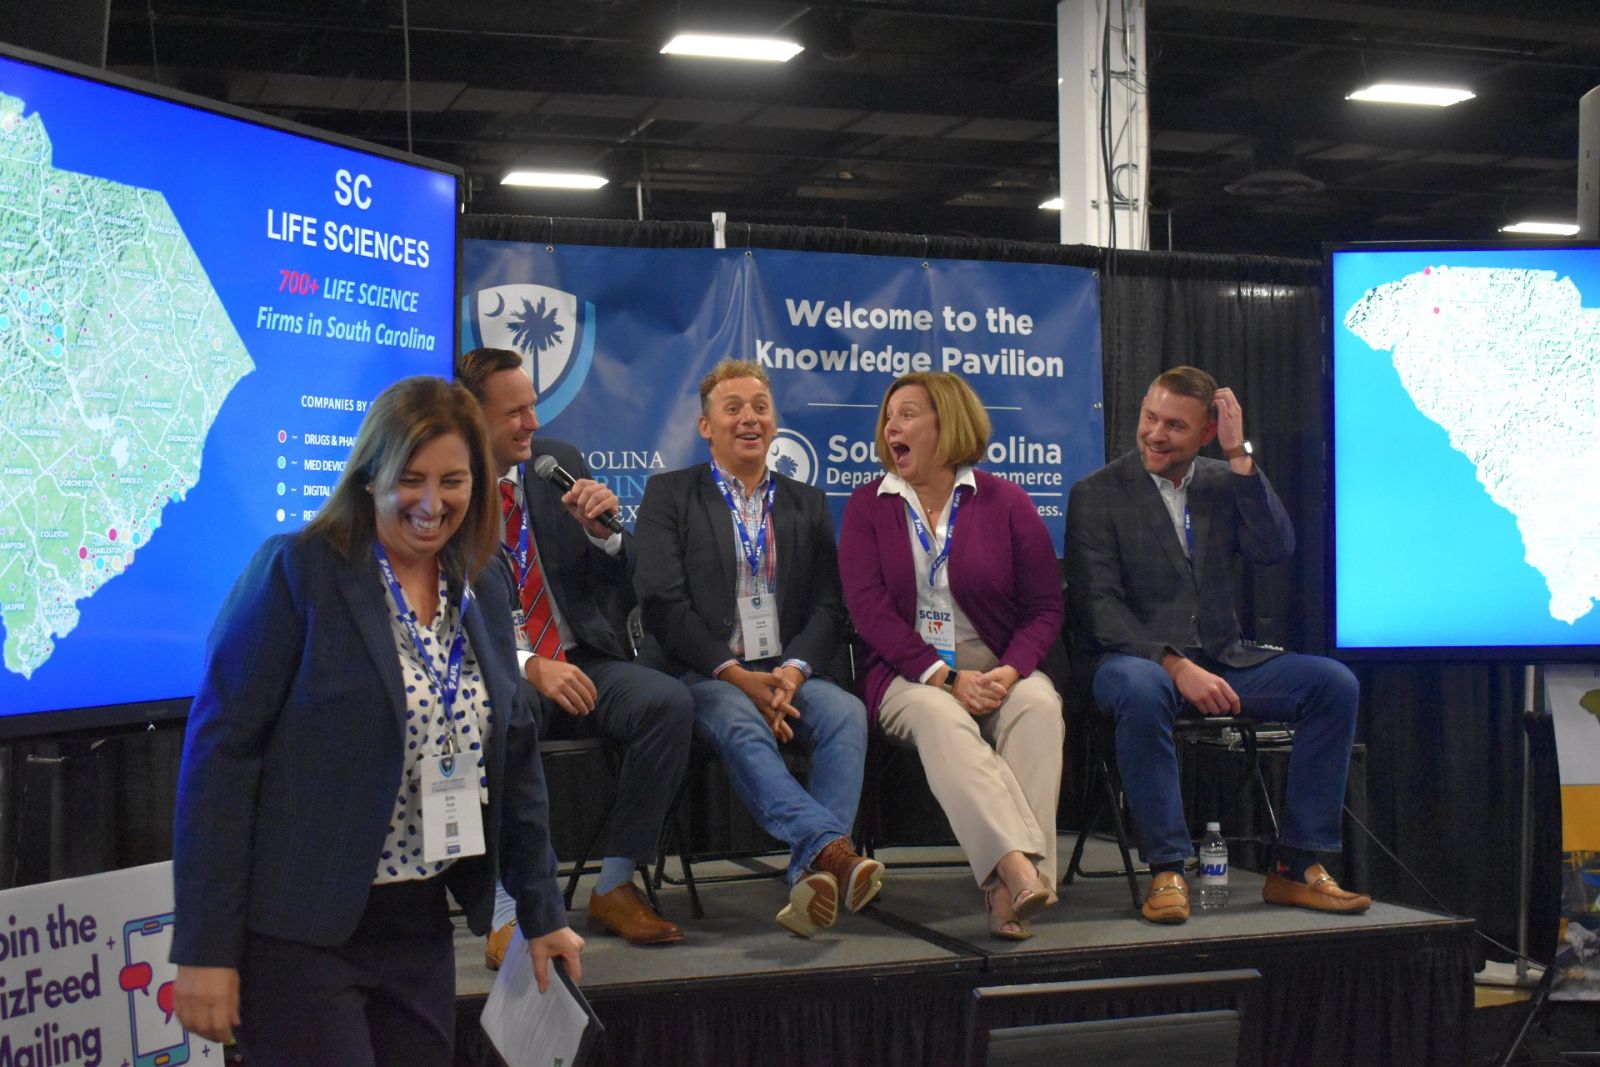 SCBIO's Erin Ford introduces Chappel, Stefanich, Young and Shirley on a life science panel Saturday at the S.C. Manufacturing Conference and Expo. (Photo/Molly Hulsey)